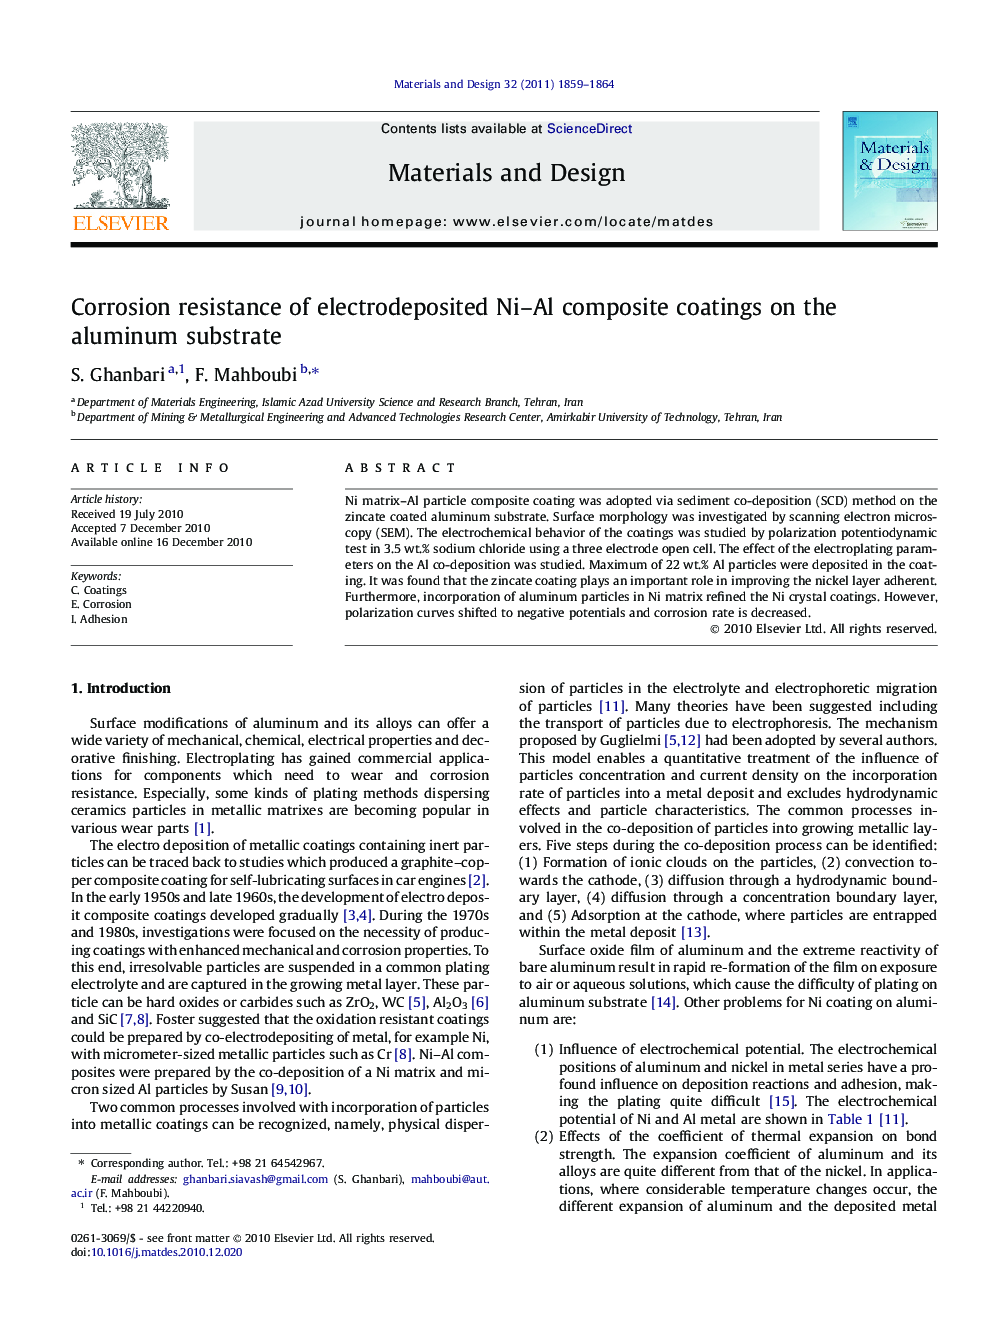 Corrosion resistance of electrodeposited Ni-Al composite coatings on the aluminum substrate